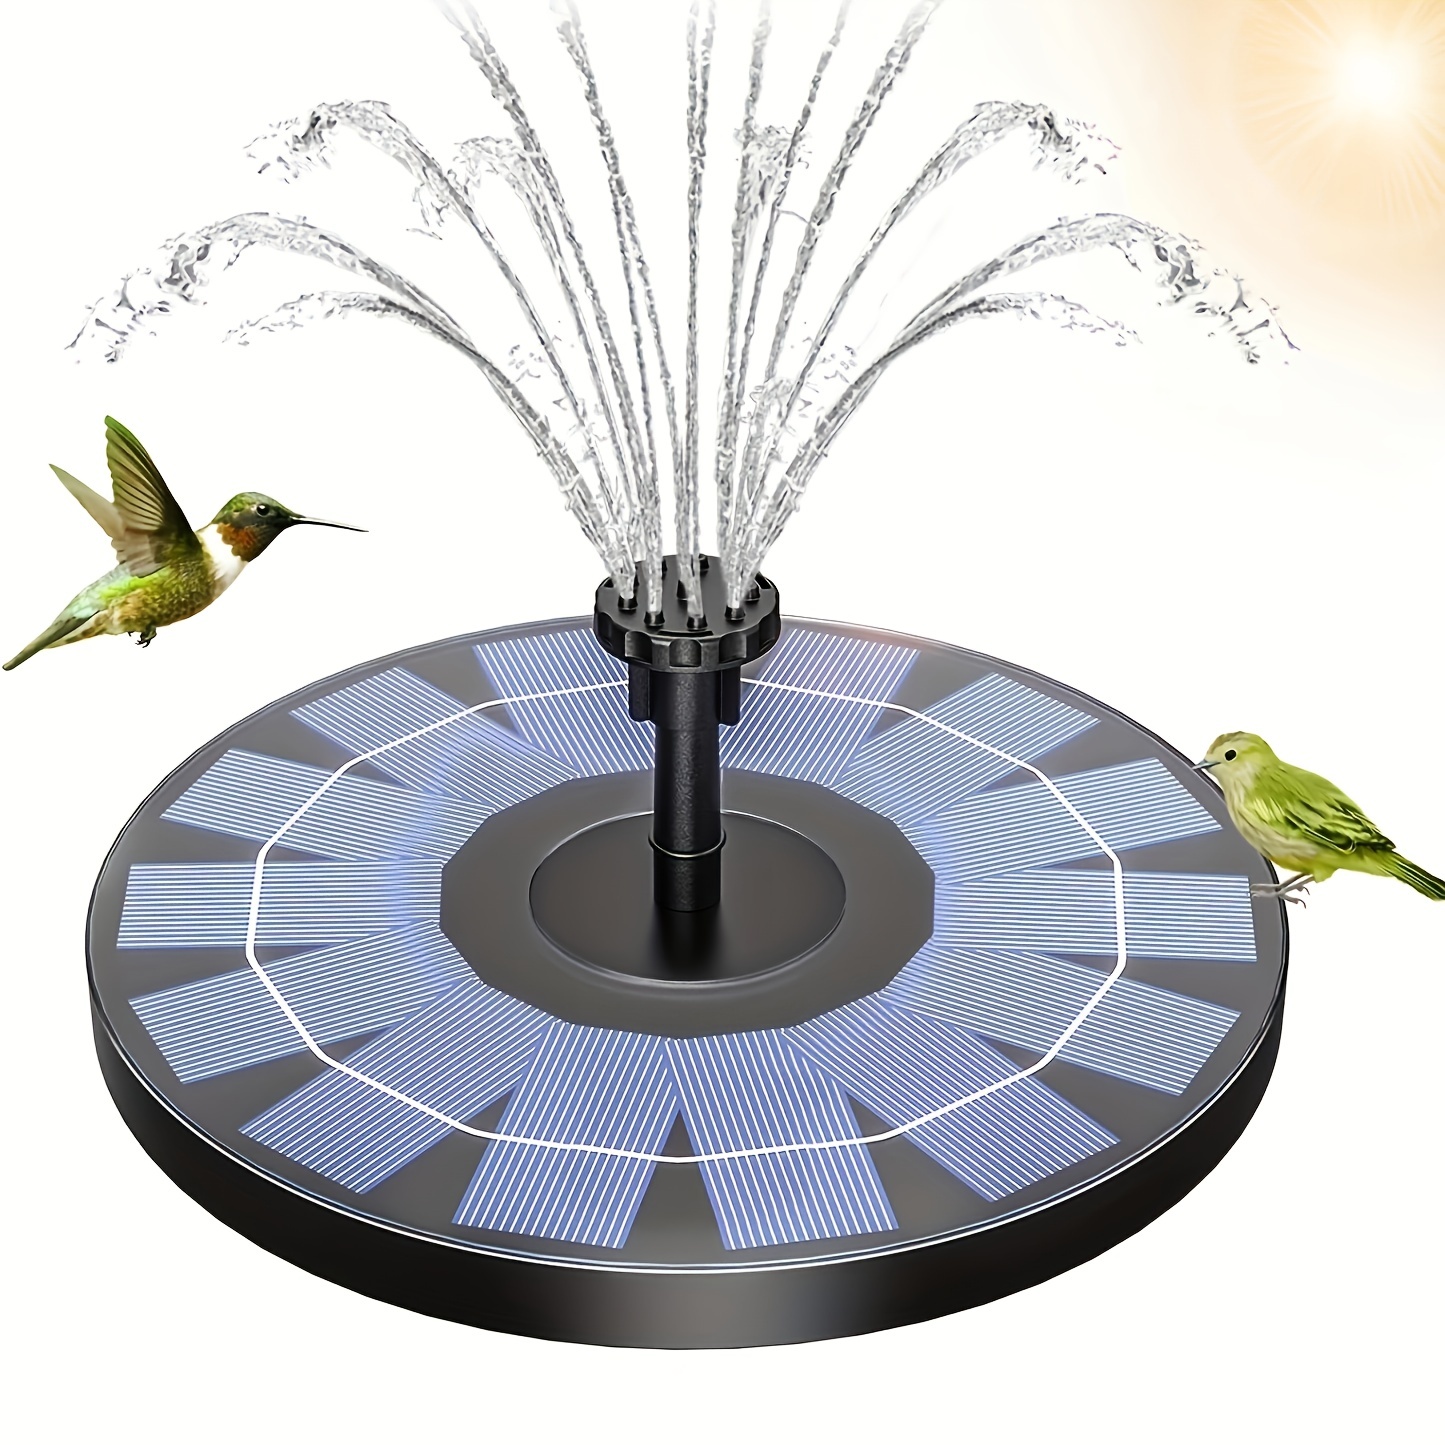 

1pc Solar Powered Water Fountain, Solar Fountain Bird Bath Pump With 6 Nozzles, Free Standing Portable Floating Solar Powered Water Fountain Pump For Garden, Pond, Pool, Outdoor And Backyard, 1.5w